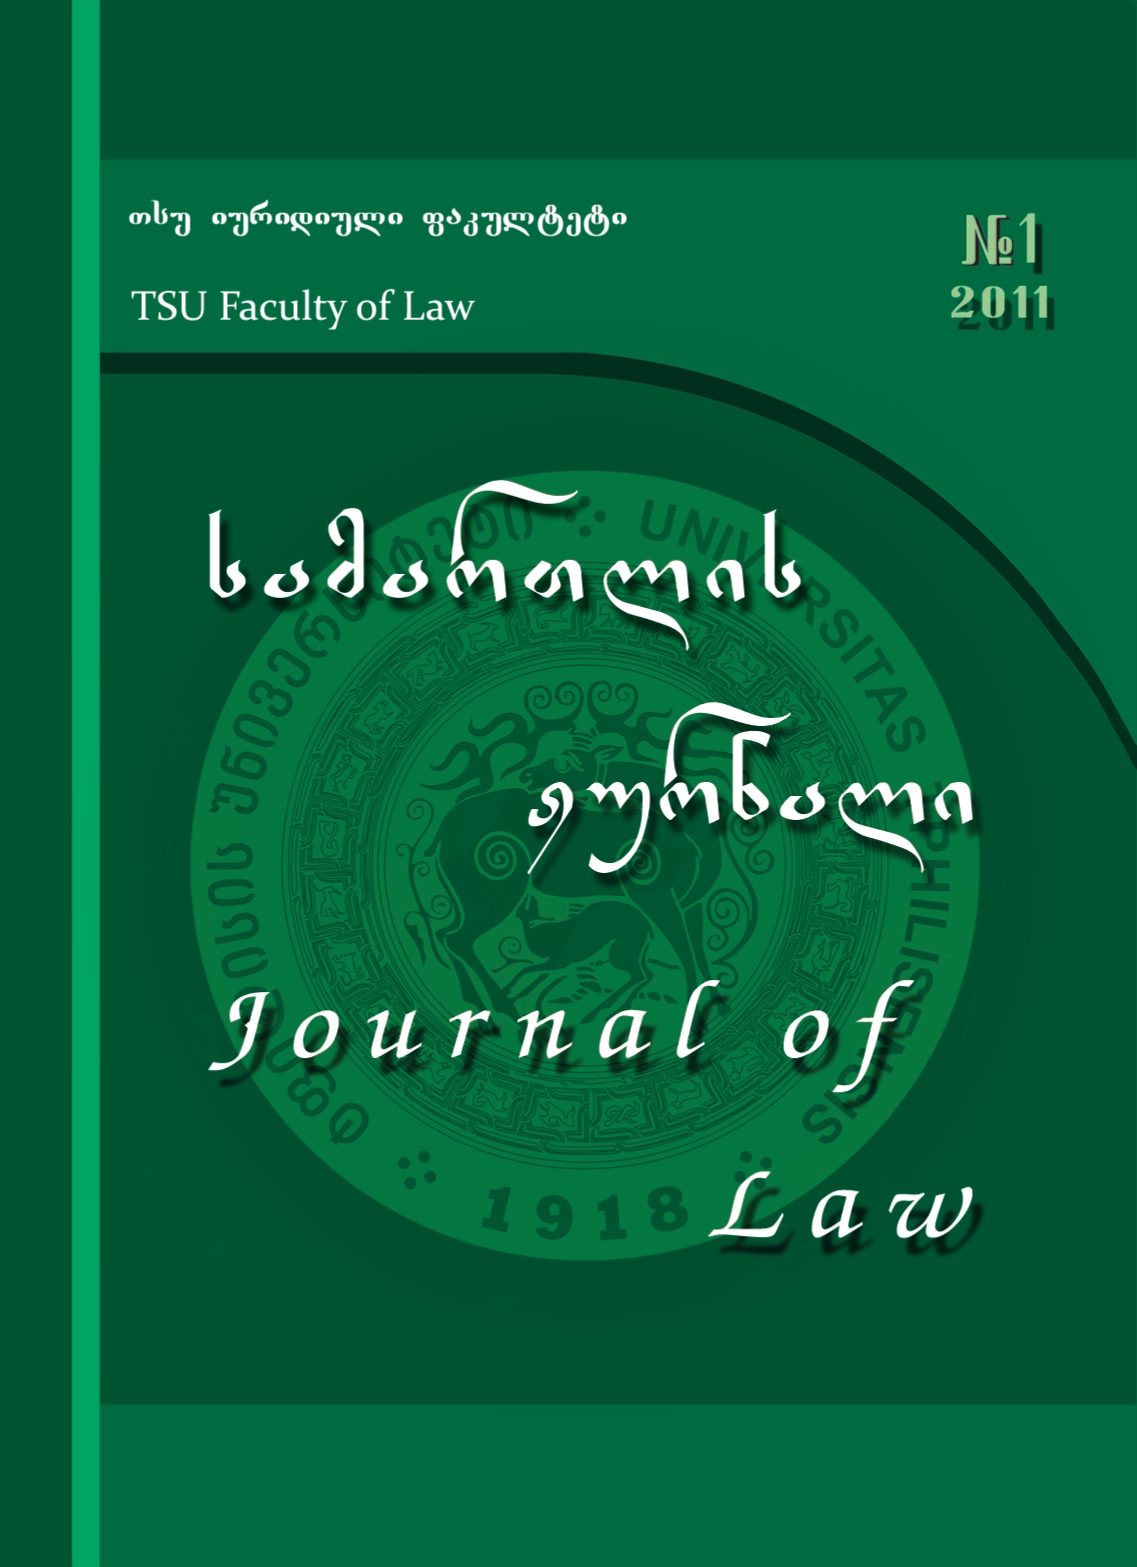 					View No. 1 (2011): Journal of Law
				